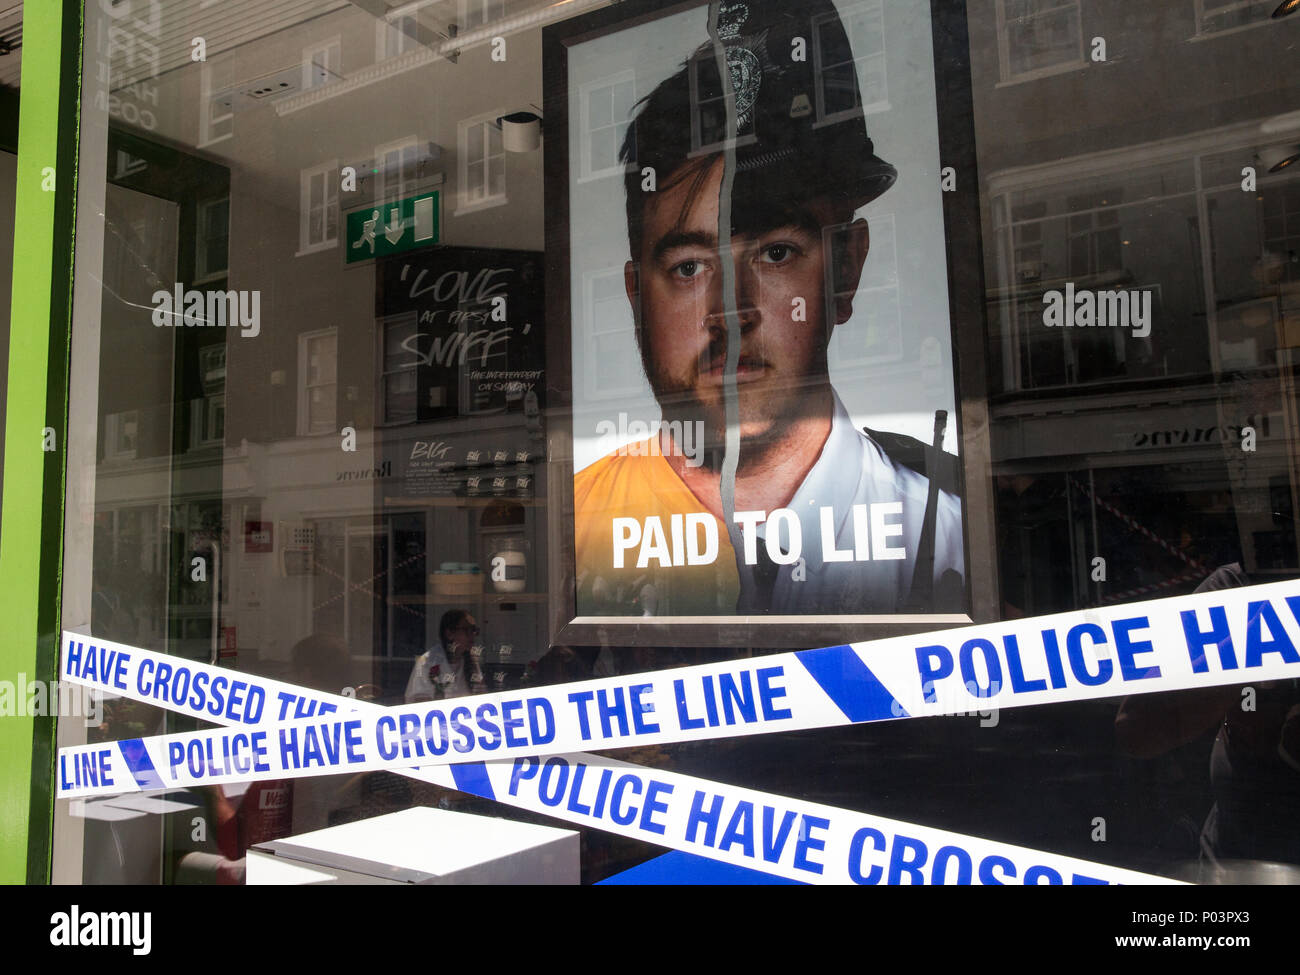 Cosmetic store, Lush,with its Spycops display in the window in Bond Street. It focussed on undercover police working to get information from activists. Stock Photo